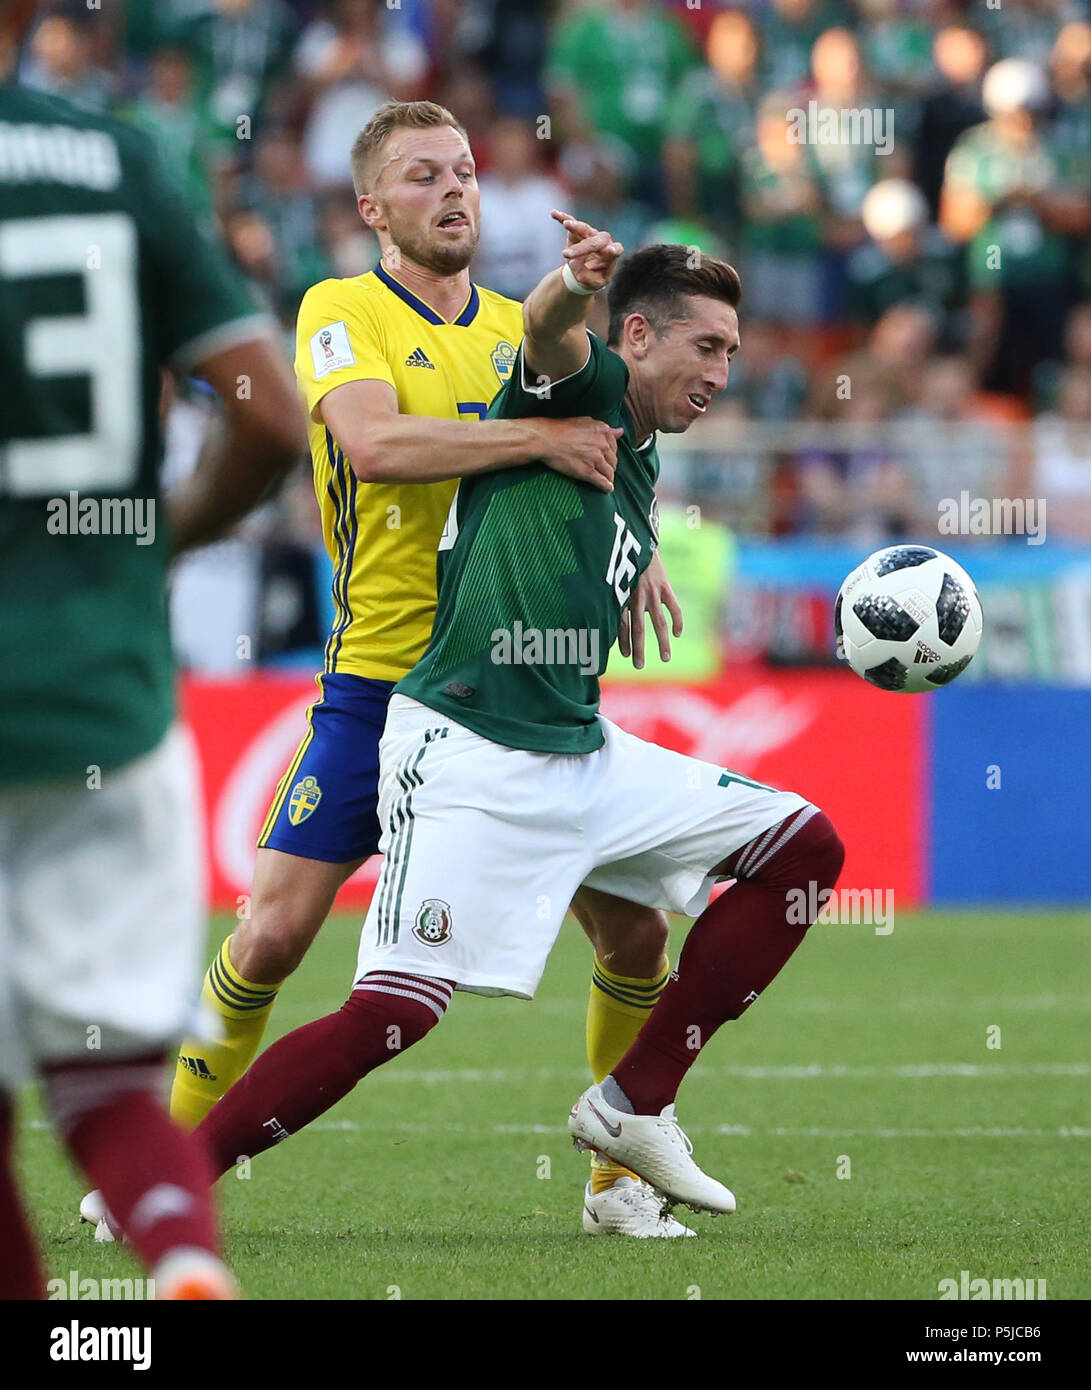 Yekaterinburg, Russia. 27th June, 2018. Hector Herrera (R) of Mexico vies with Sebastian Larsson of Sweden during the 2018 FIFA World Cup Group F match between Mexico and Sweden in Yekaterinburg, Russia, June 27, 2018. Credit: Li Ming/Xinhua/Alamy Live News Stock Photo